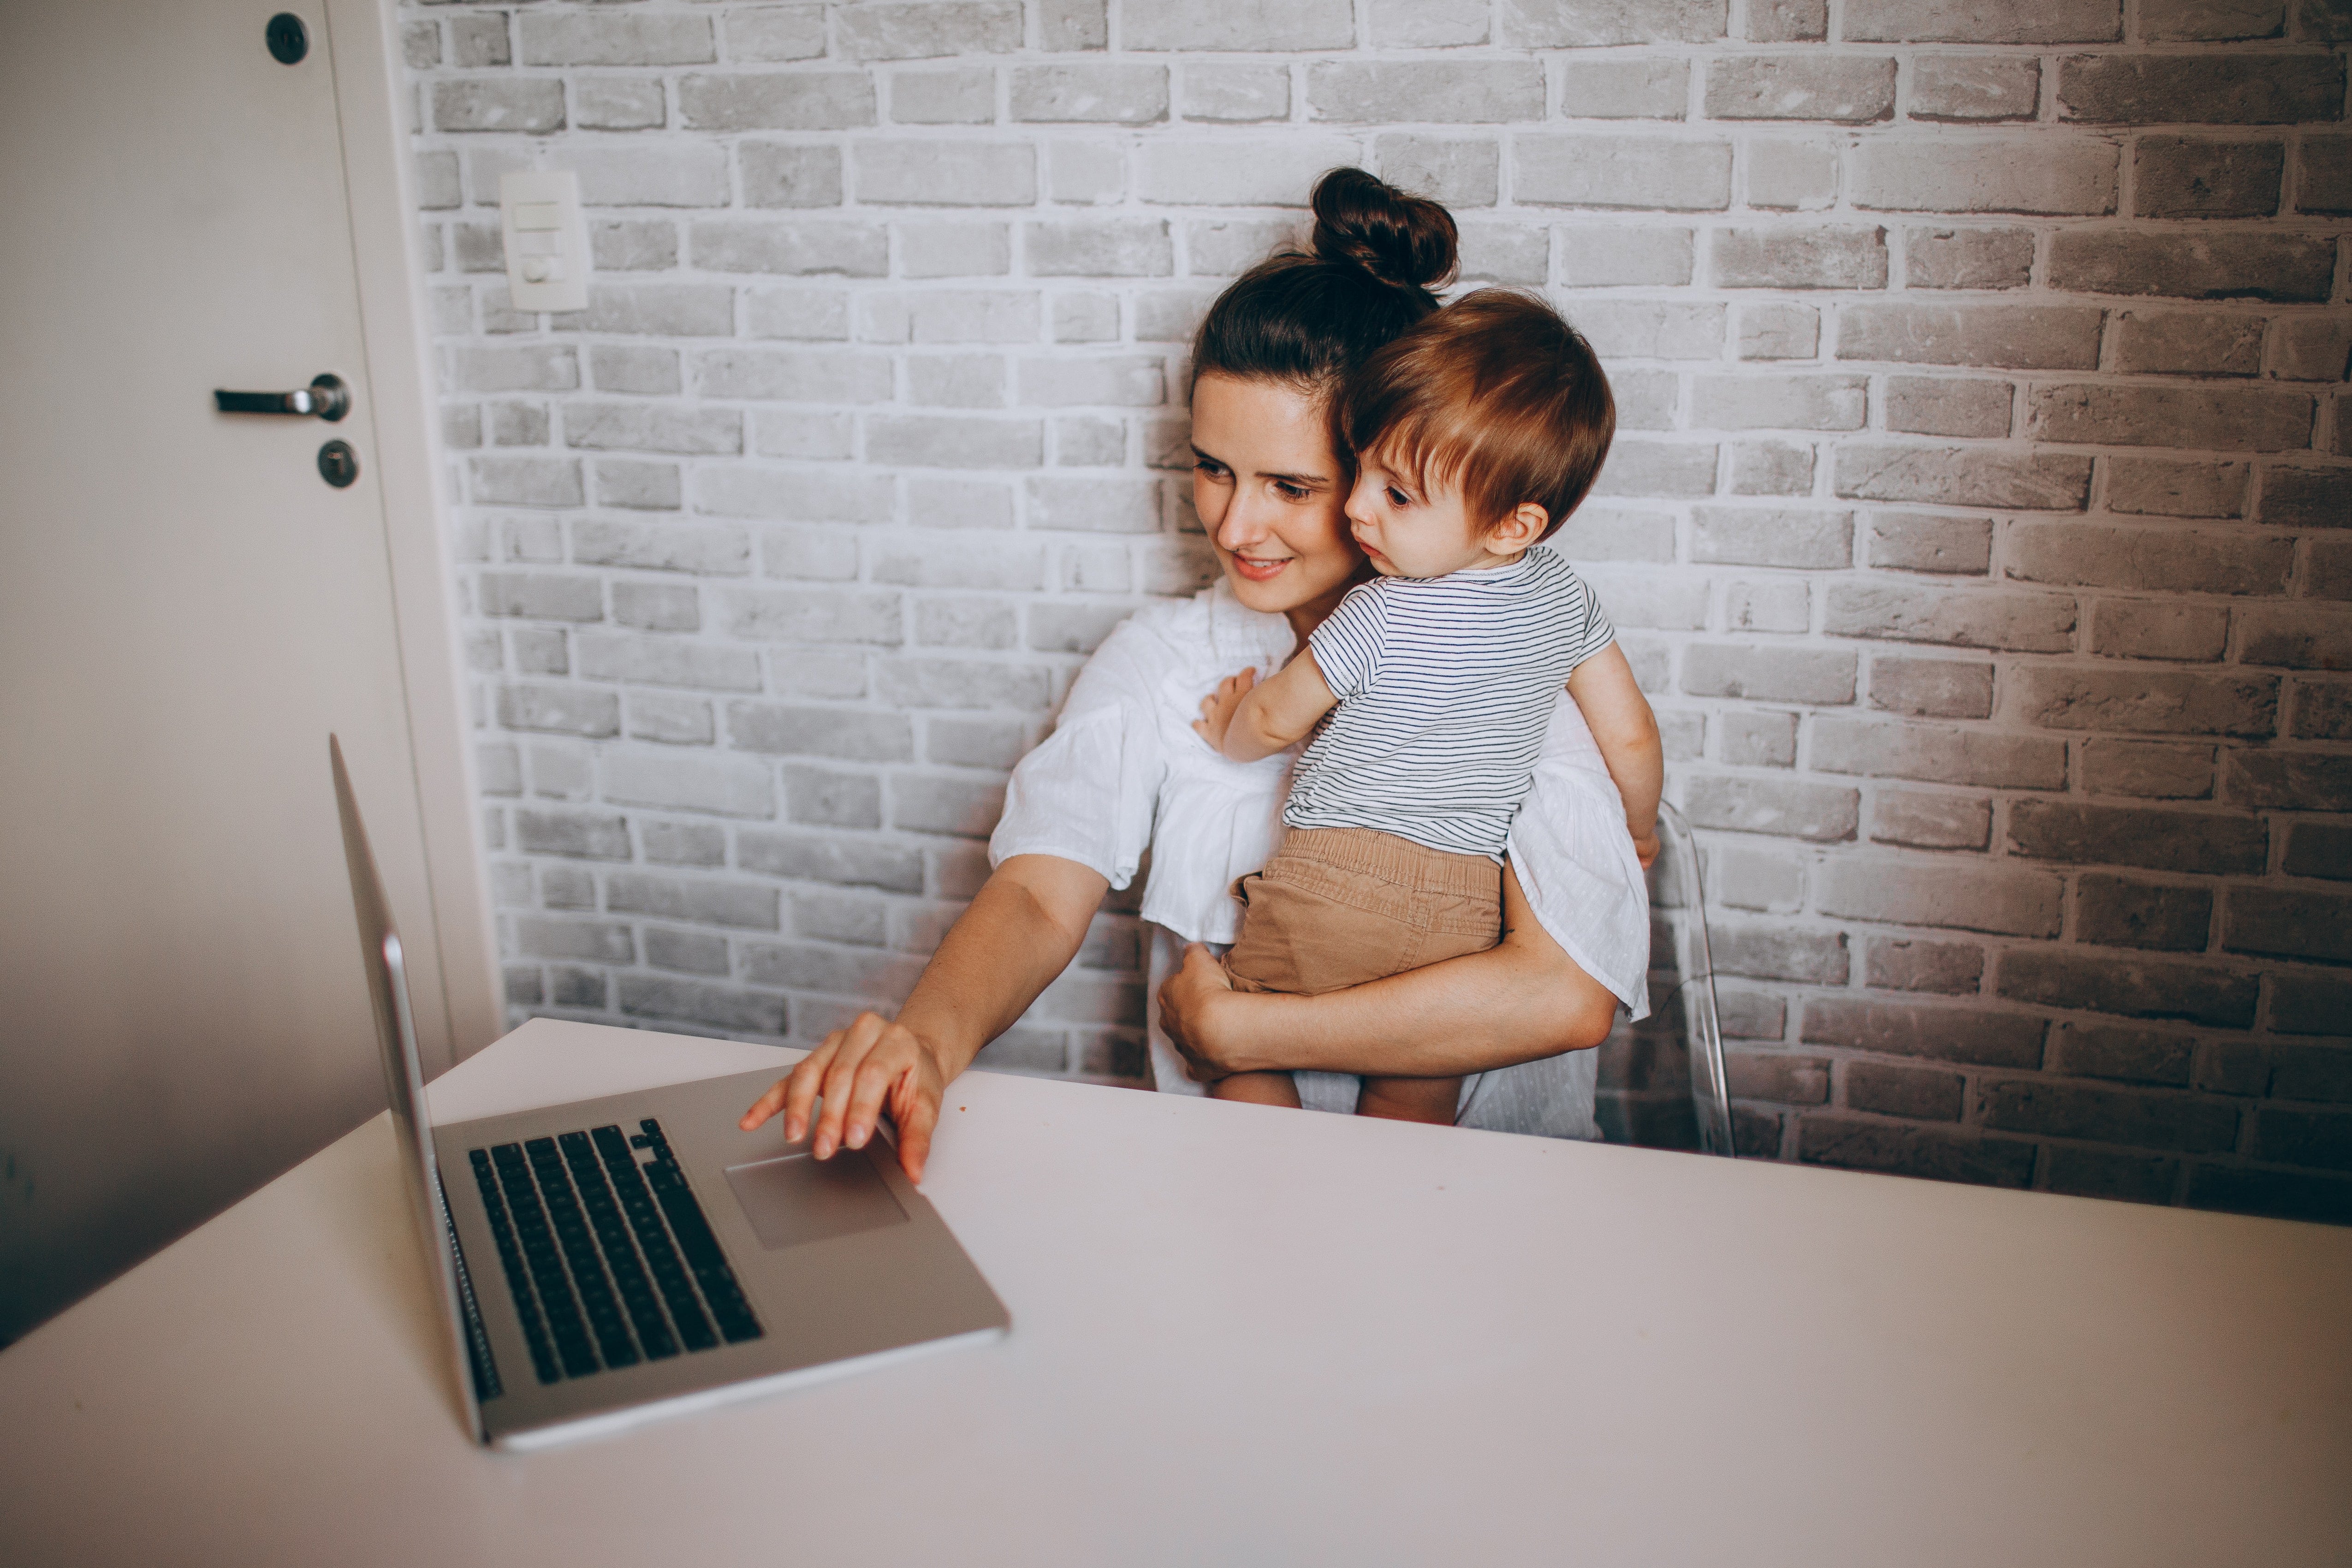 Woman on computer while holding child